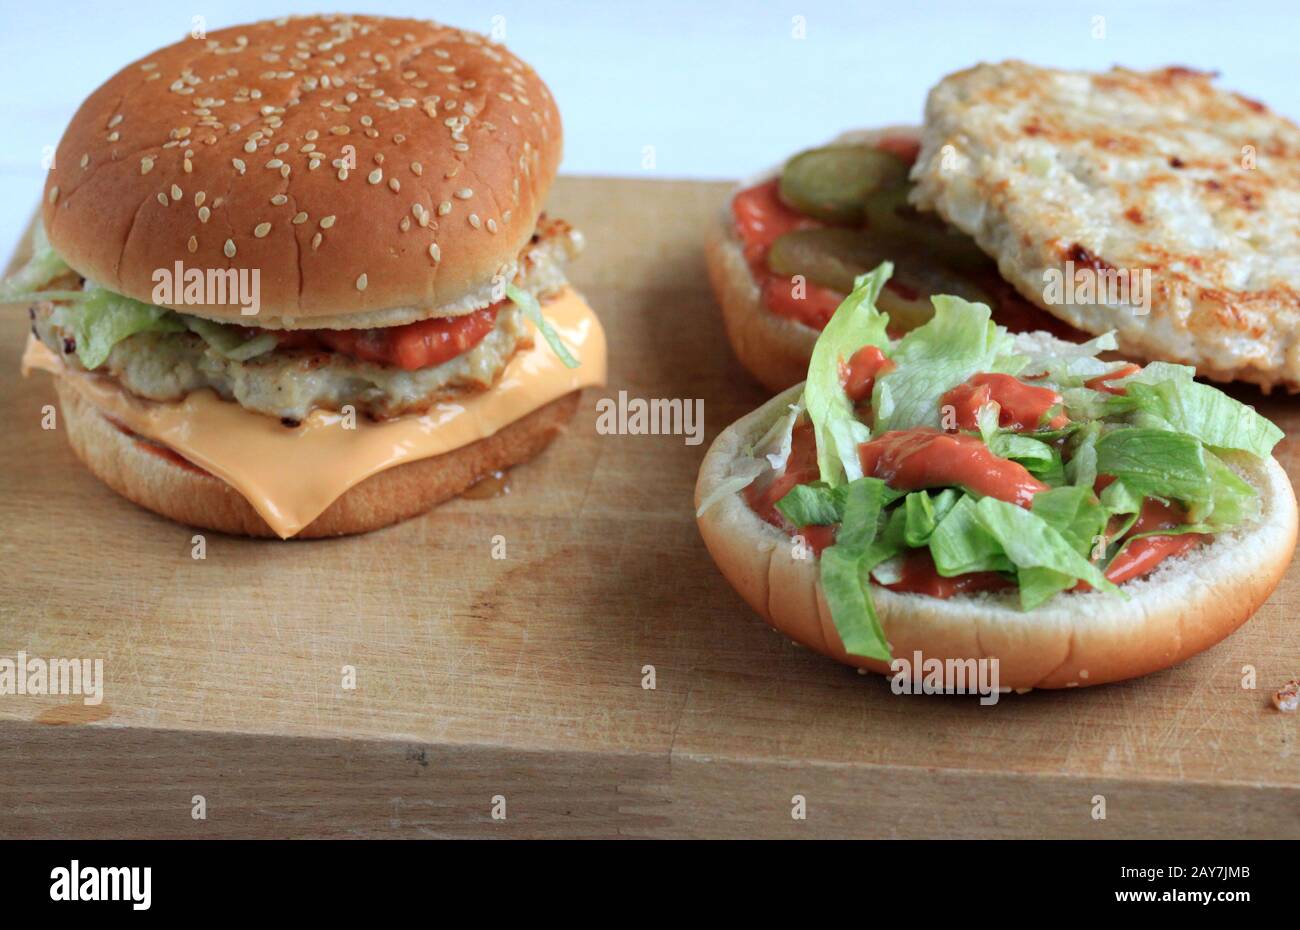 A delicious home-made hamburger with meat and vegetables.Tasty  A delicious home-made hamburger with meat and vegetables.Tasty sandwich with vegetable Stock Photo